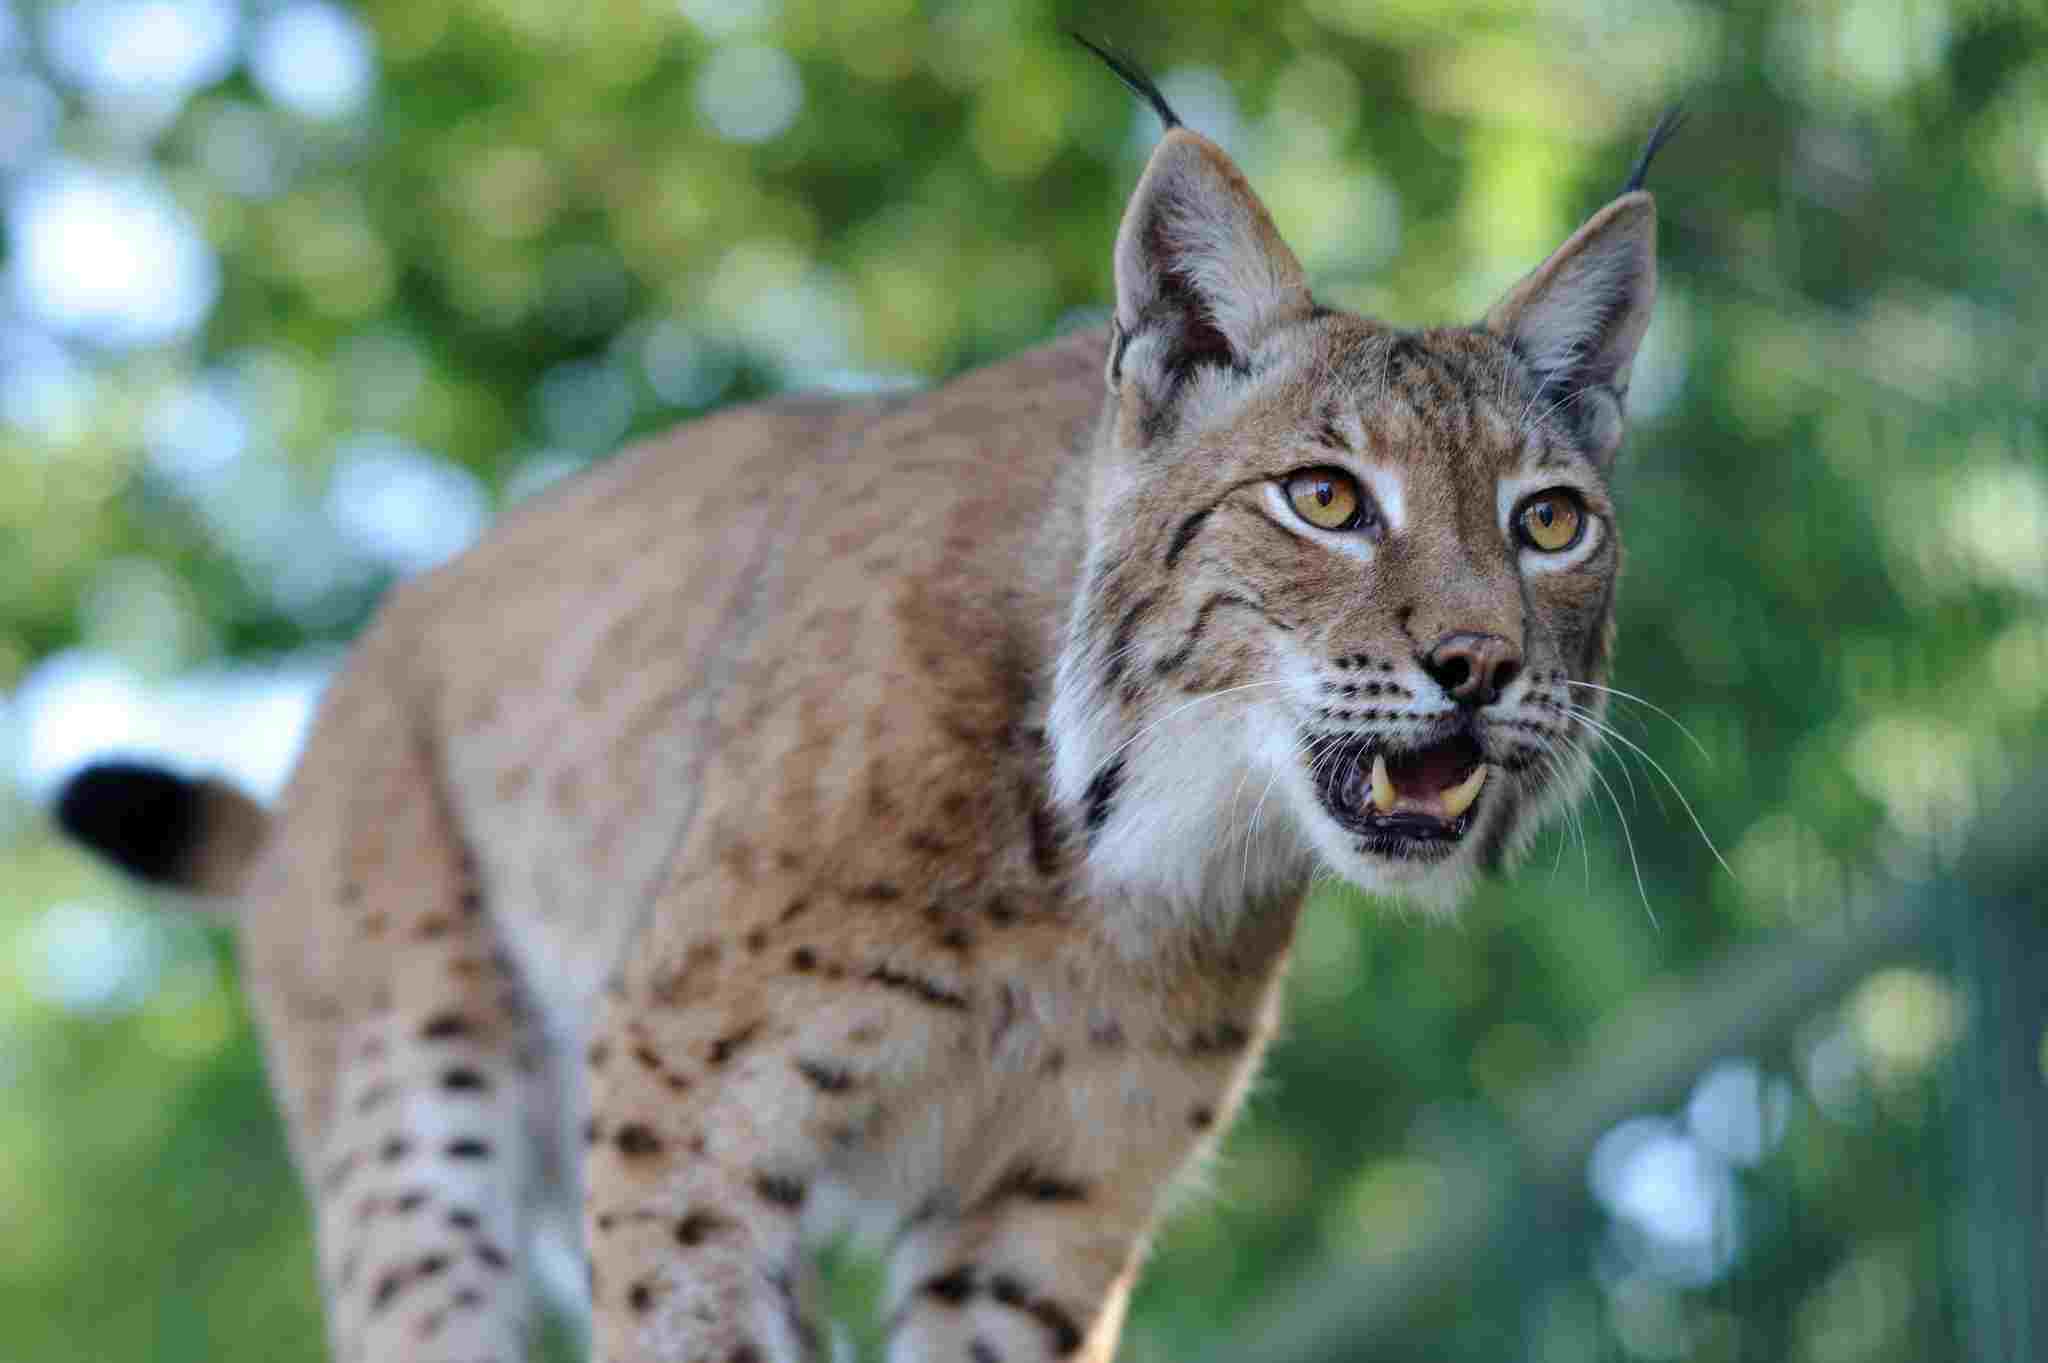 Snow Leopards' Predators and Prey Discussed: Eurasian Lynx is an Apex Predator in Close Ecological Proximity to Snow Leopards (Credit: Oregon State University 2010, Uploaded Online 2018 .CC BY-SA 2.0.)